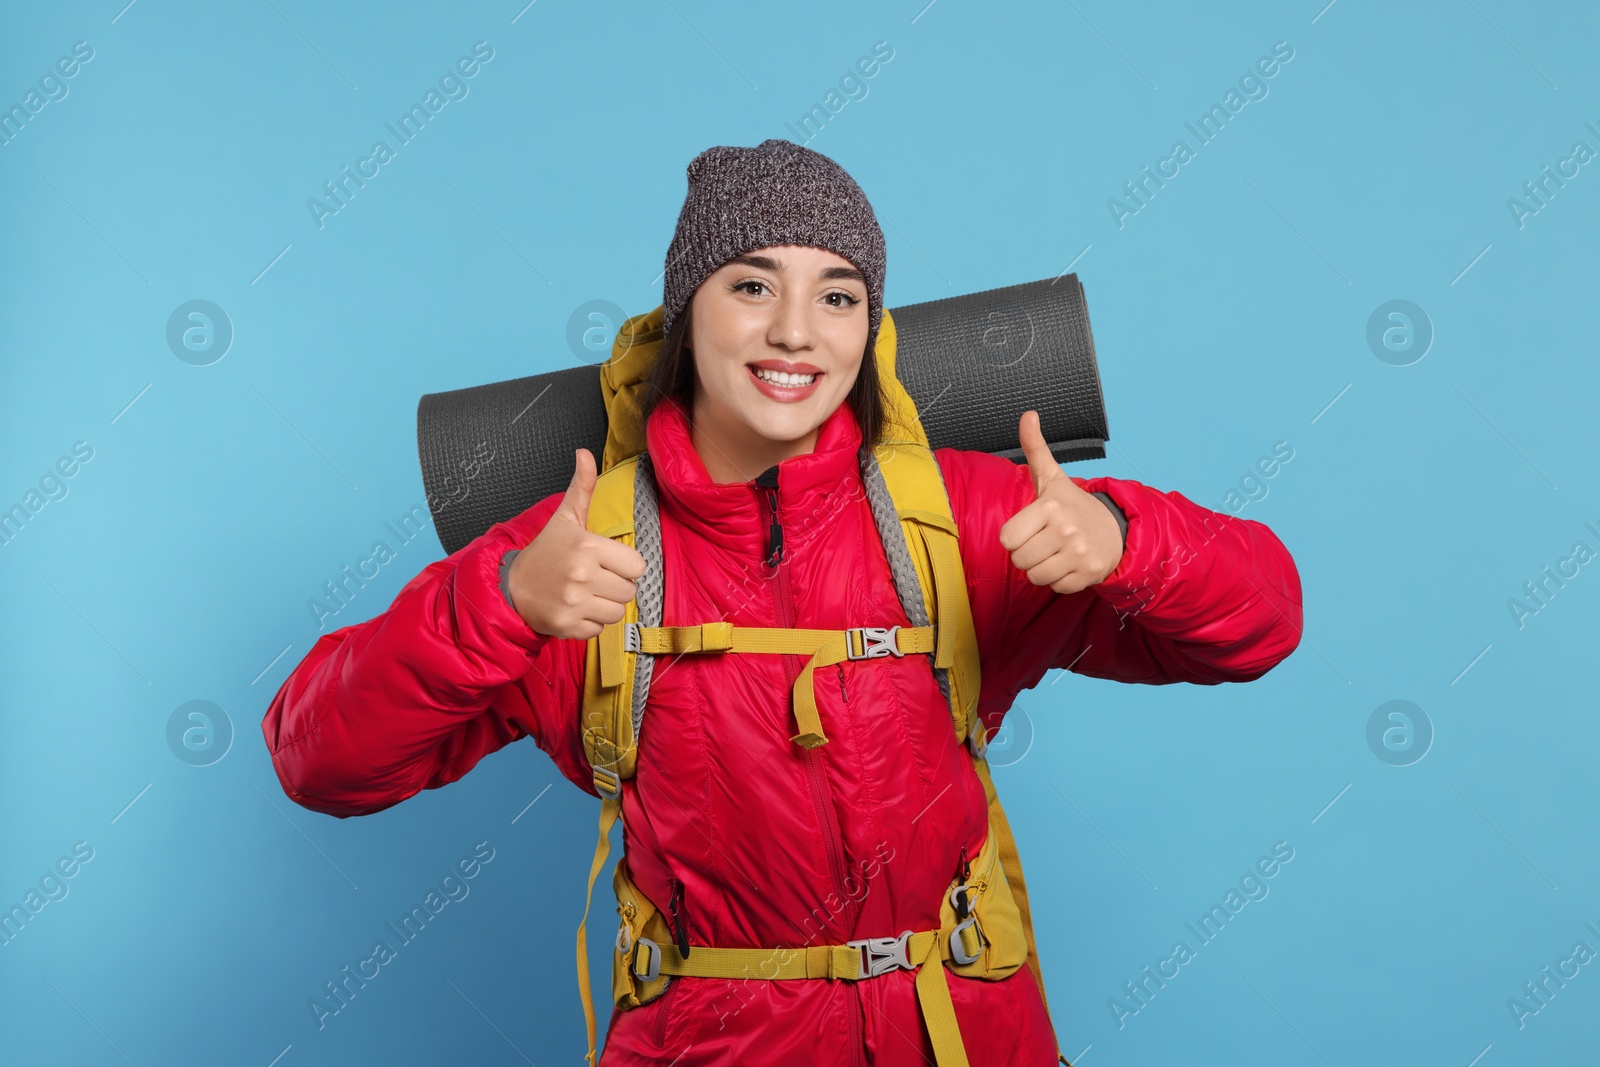 Photo of Smiling young woman with backpack showing thumbs up on light blue background. Active tourism